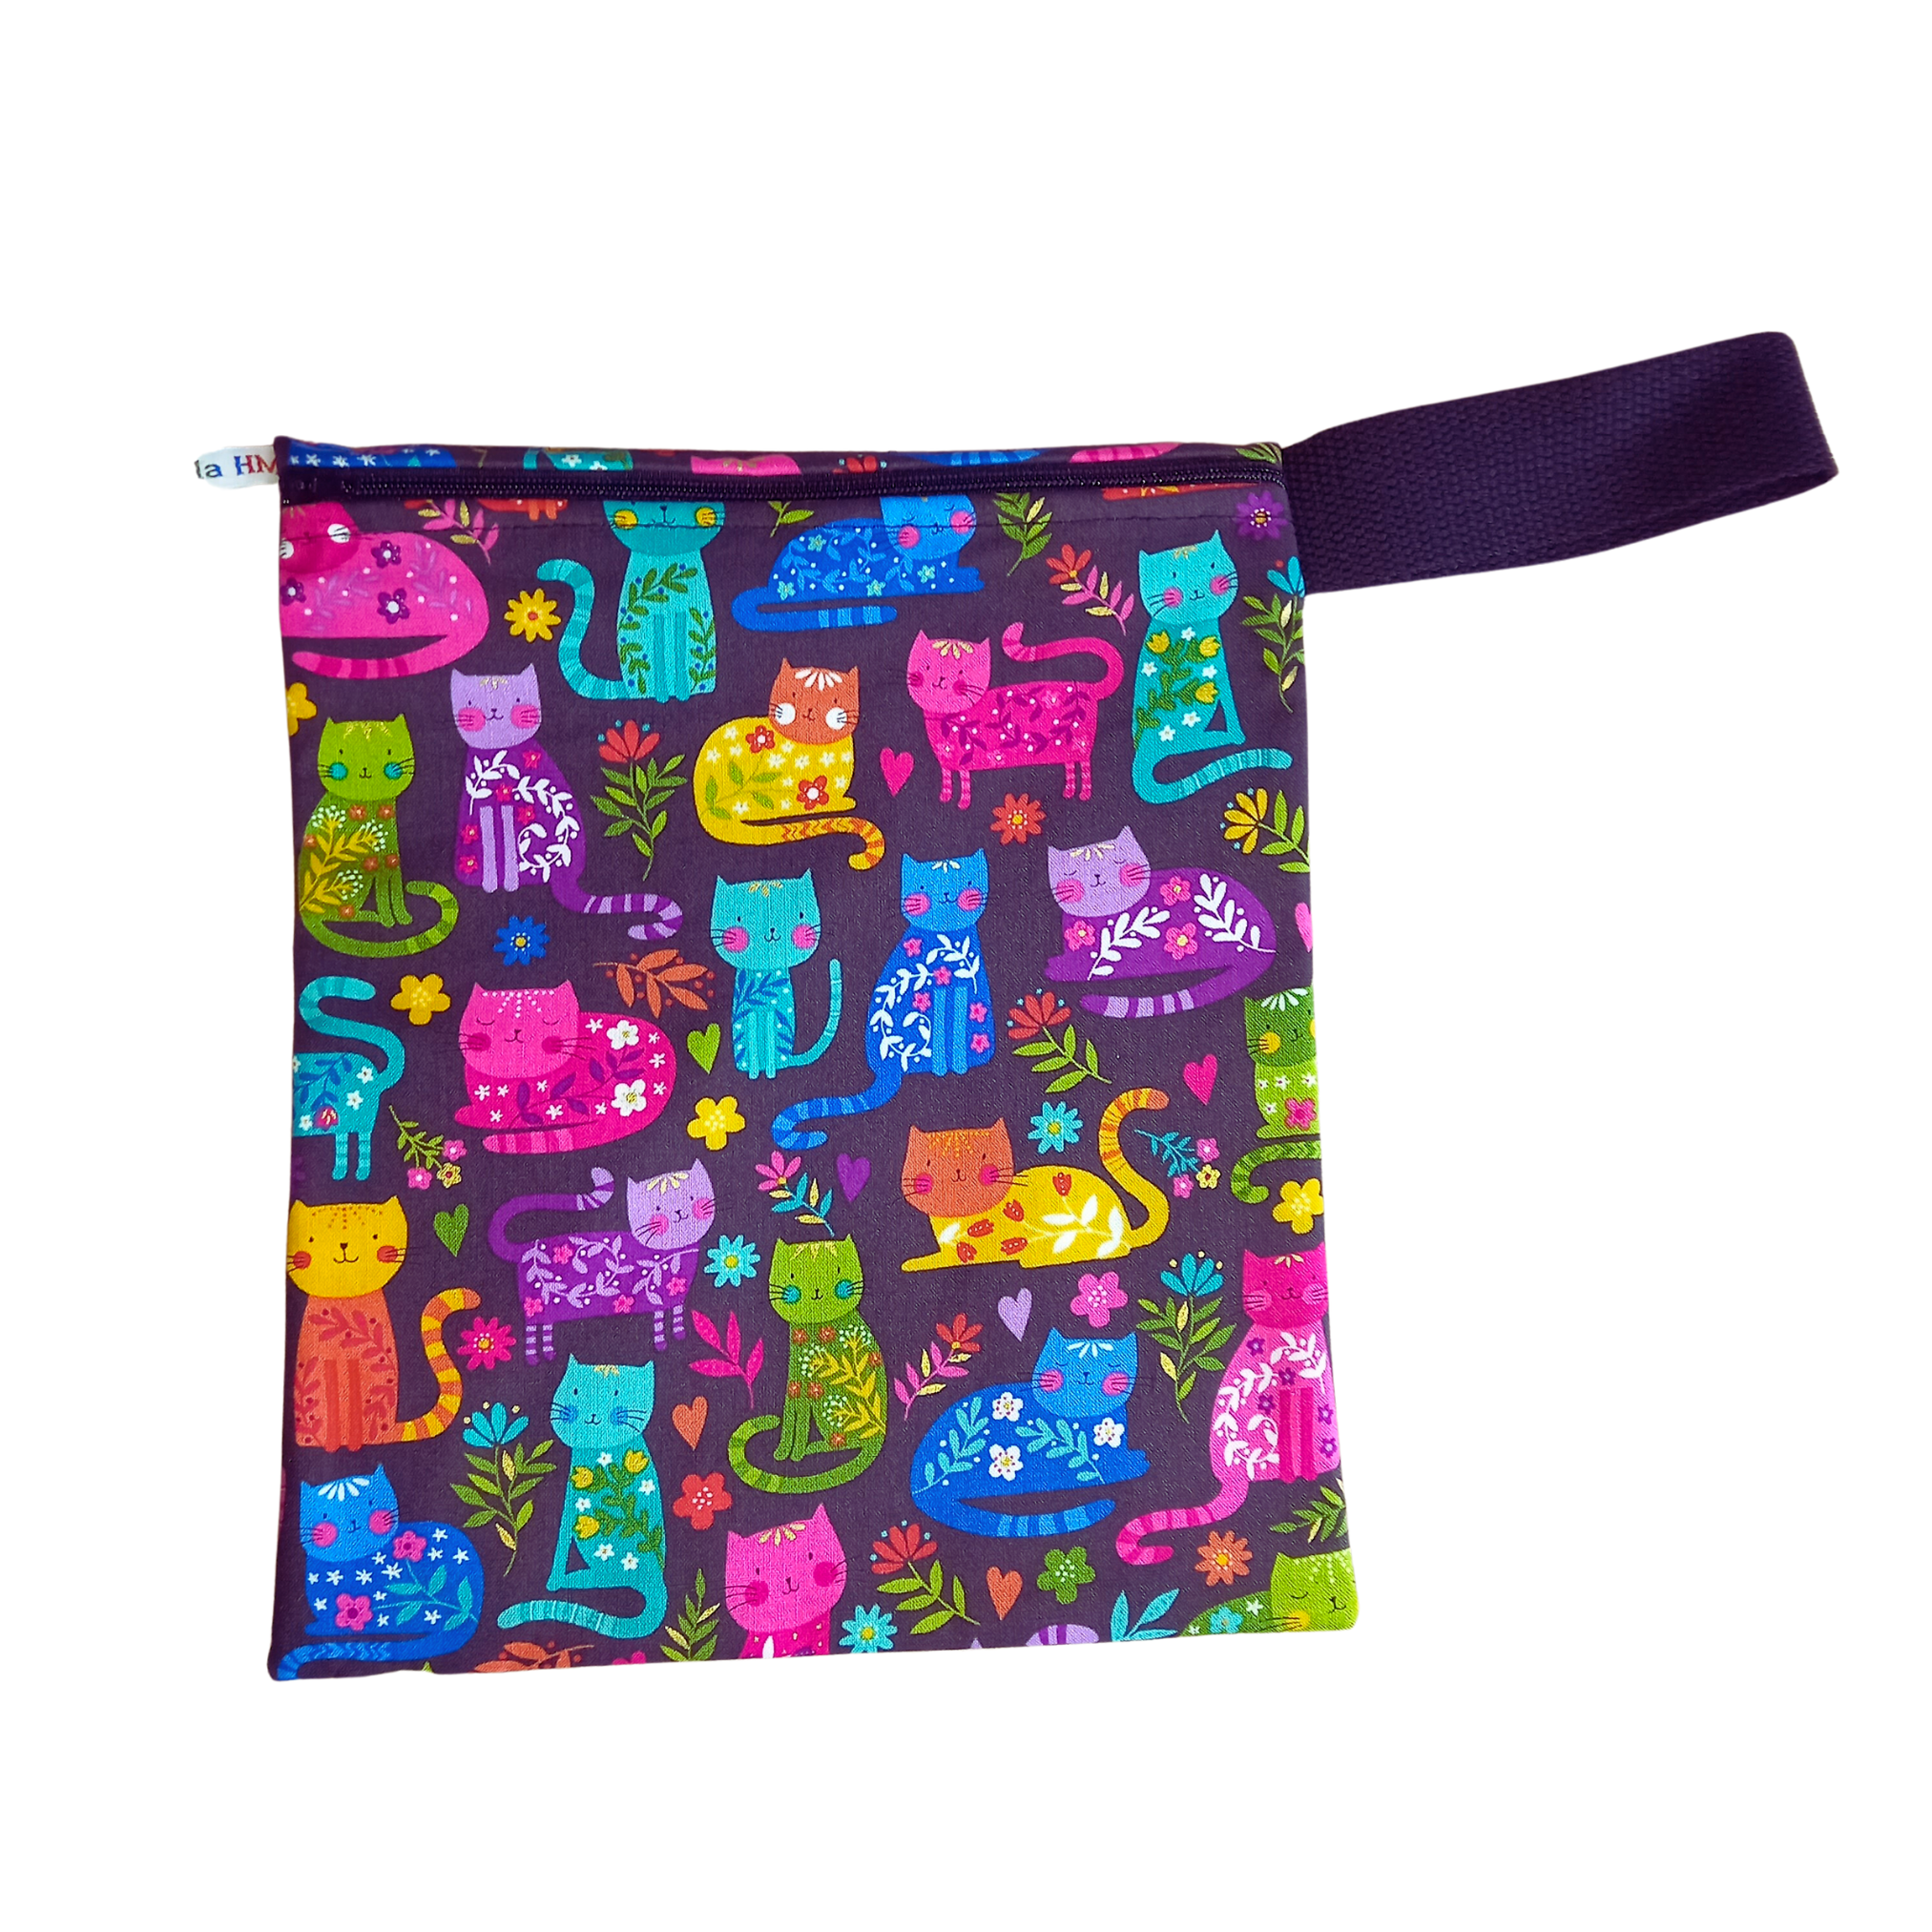 Bright Cats -  Handy Poppins Pouch, Waterproof, Washable, Food Safe, Vegan, Lined Zip Bag With Wrist Strap